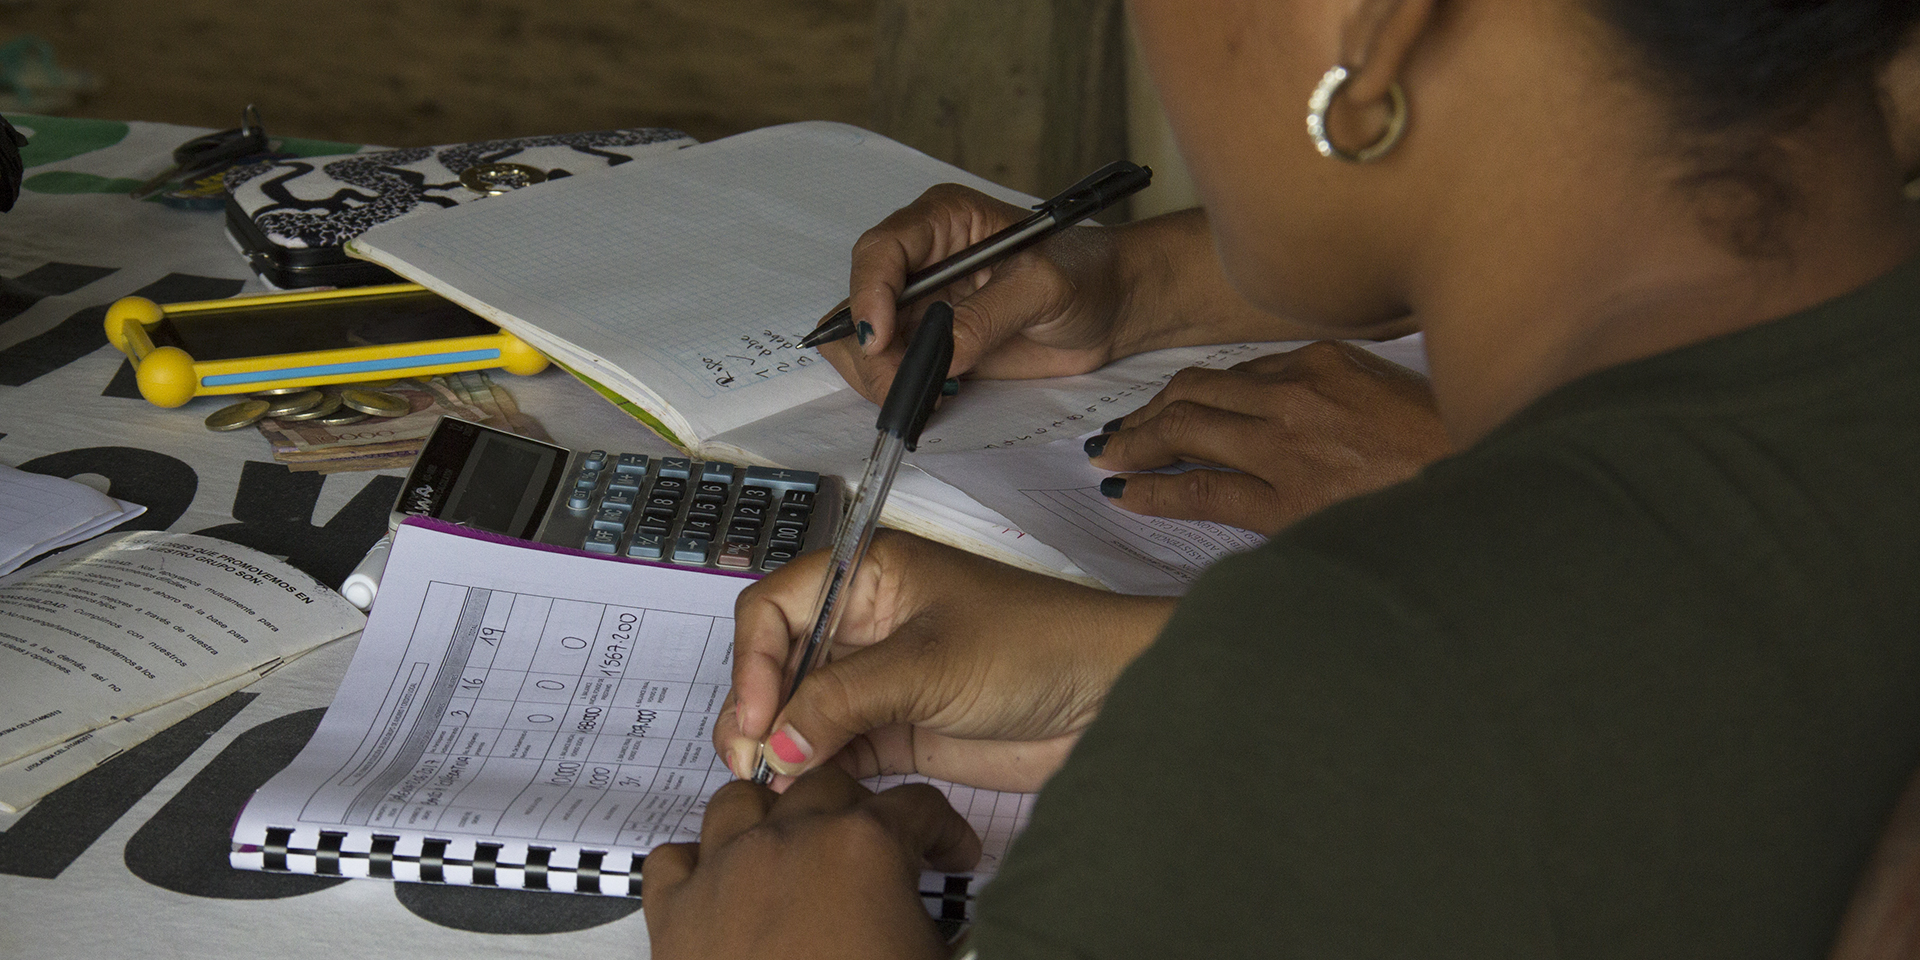 Image of two people sitting at a table and writing into workbooks with a calculator between them.